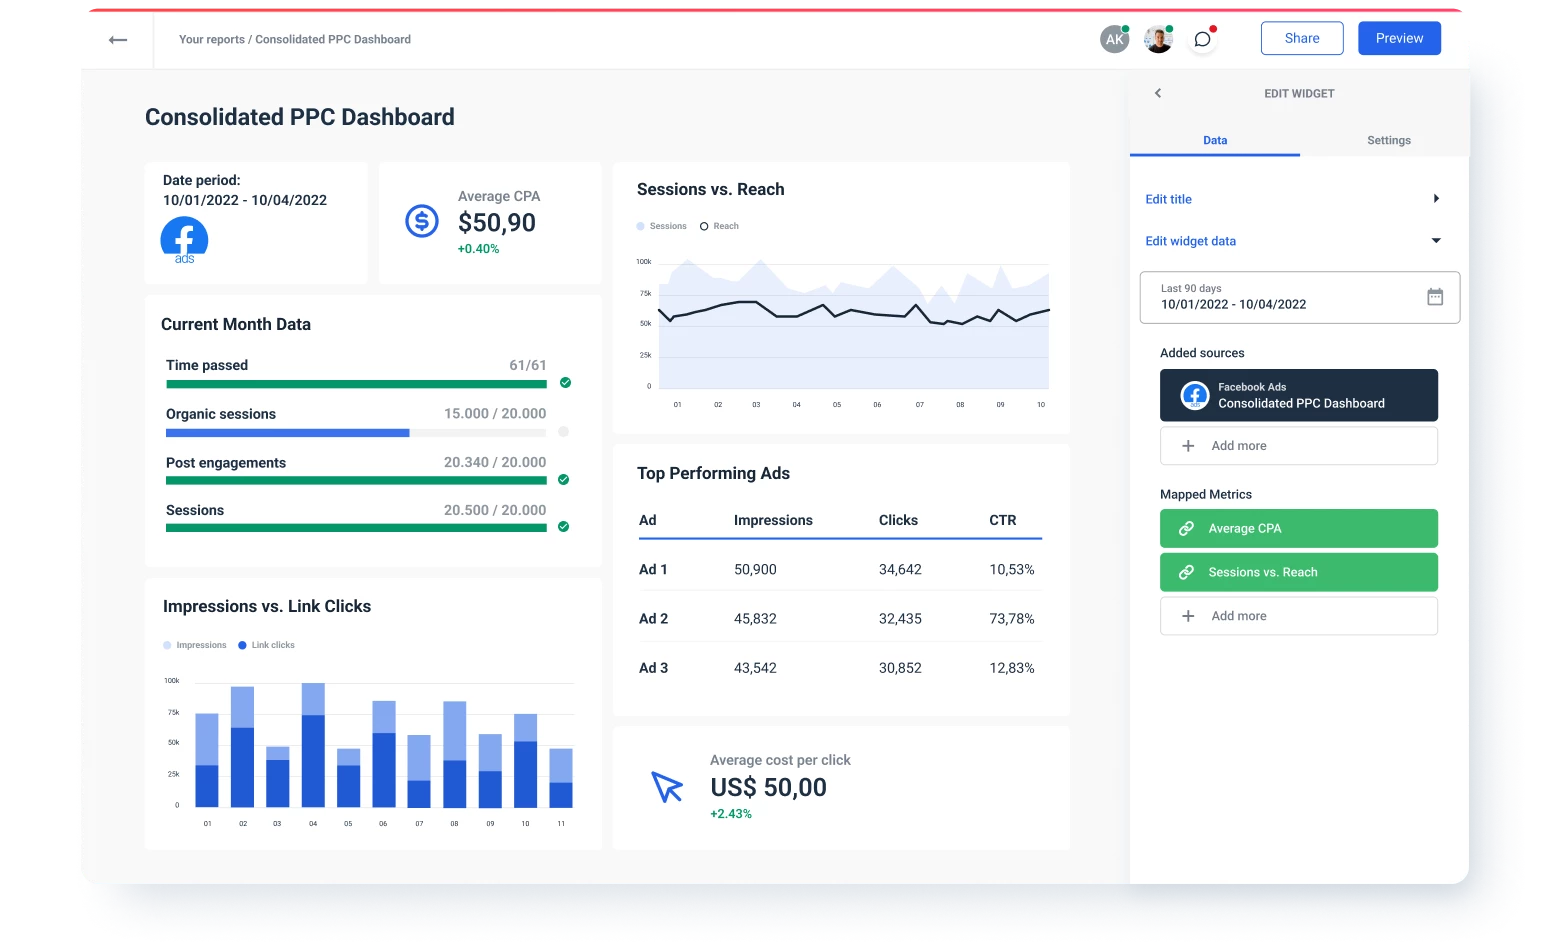 Consolidated PPC dashboard